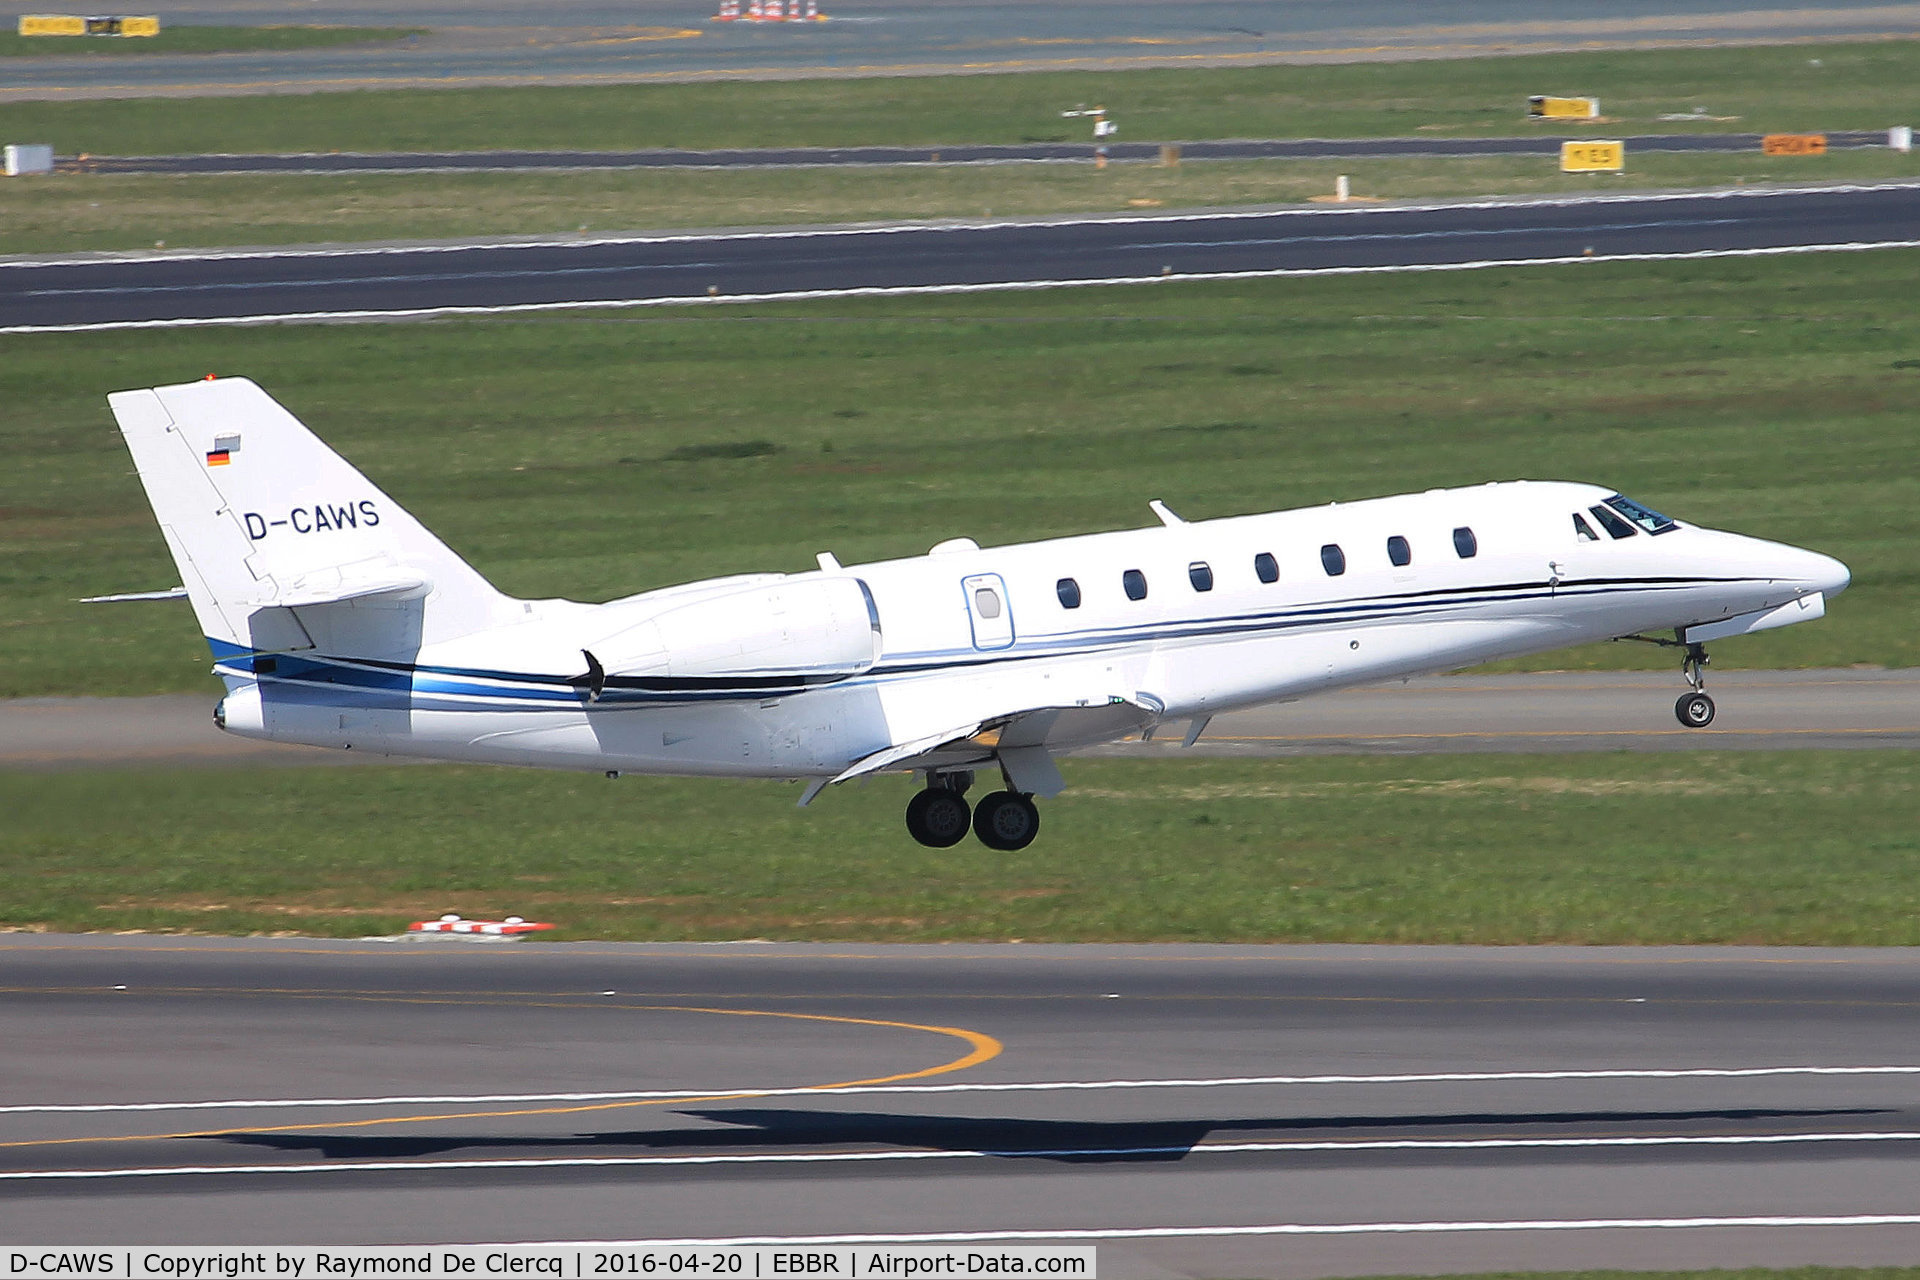 D-CAWS, 2012 Cessna 680 Citation Sovereign C/N 680-0328, Takes off from rwy 07R.